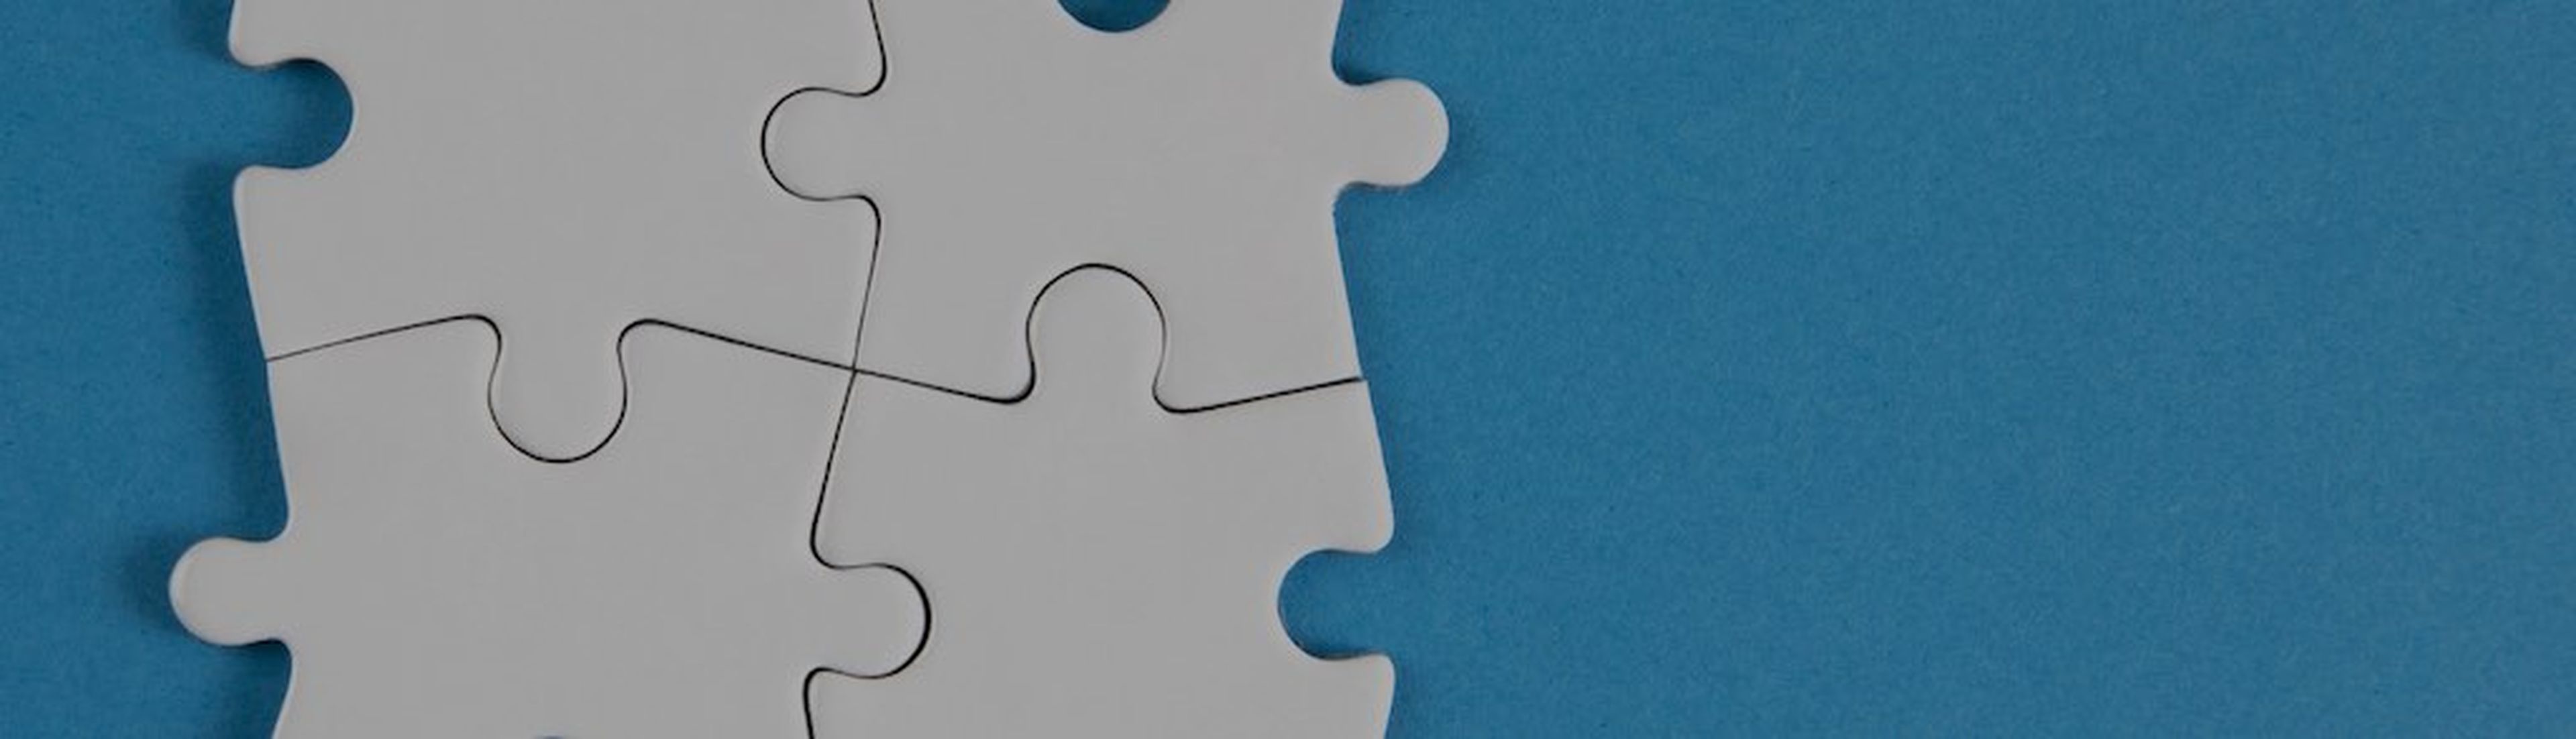 Jigsaw puzzle pieces on blue background